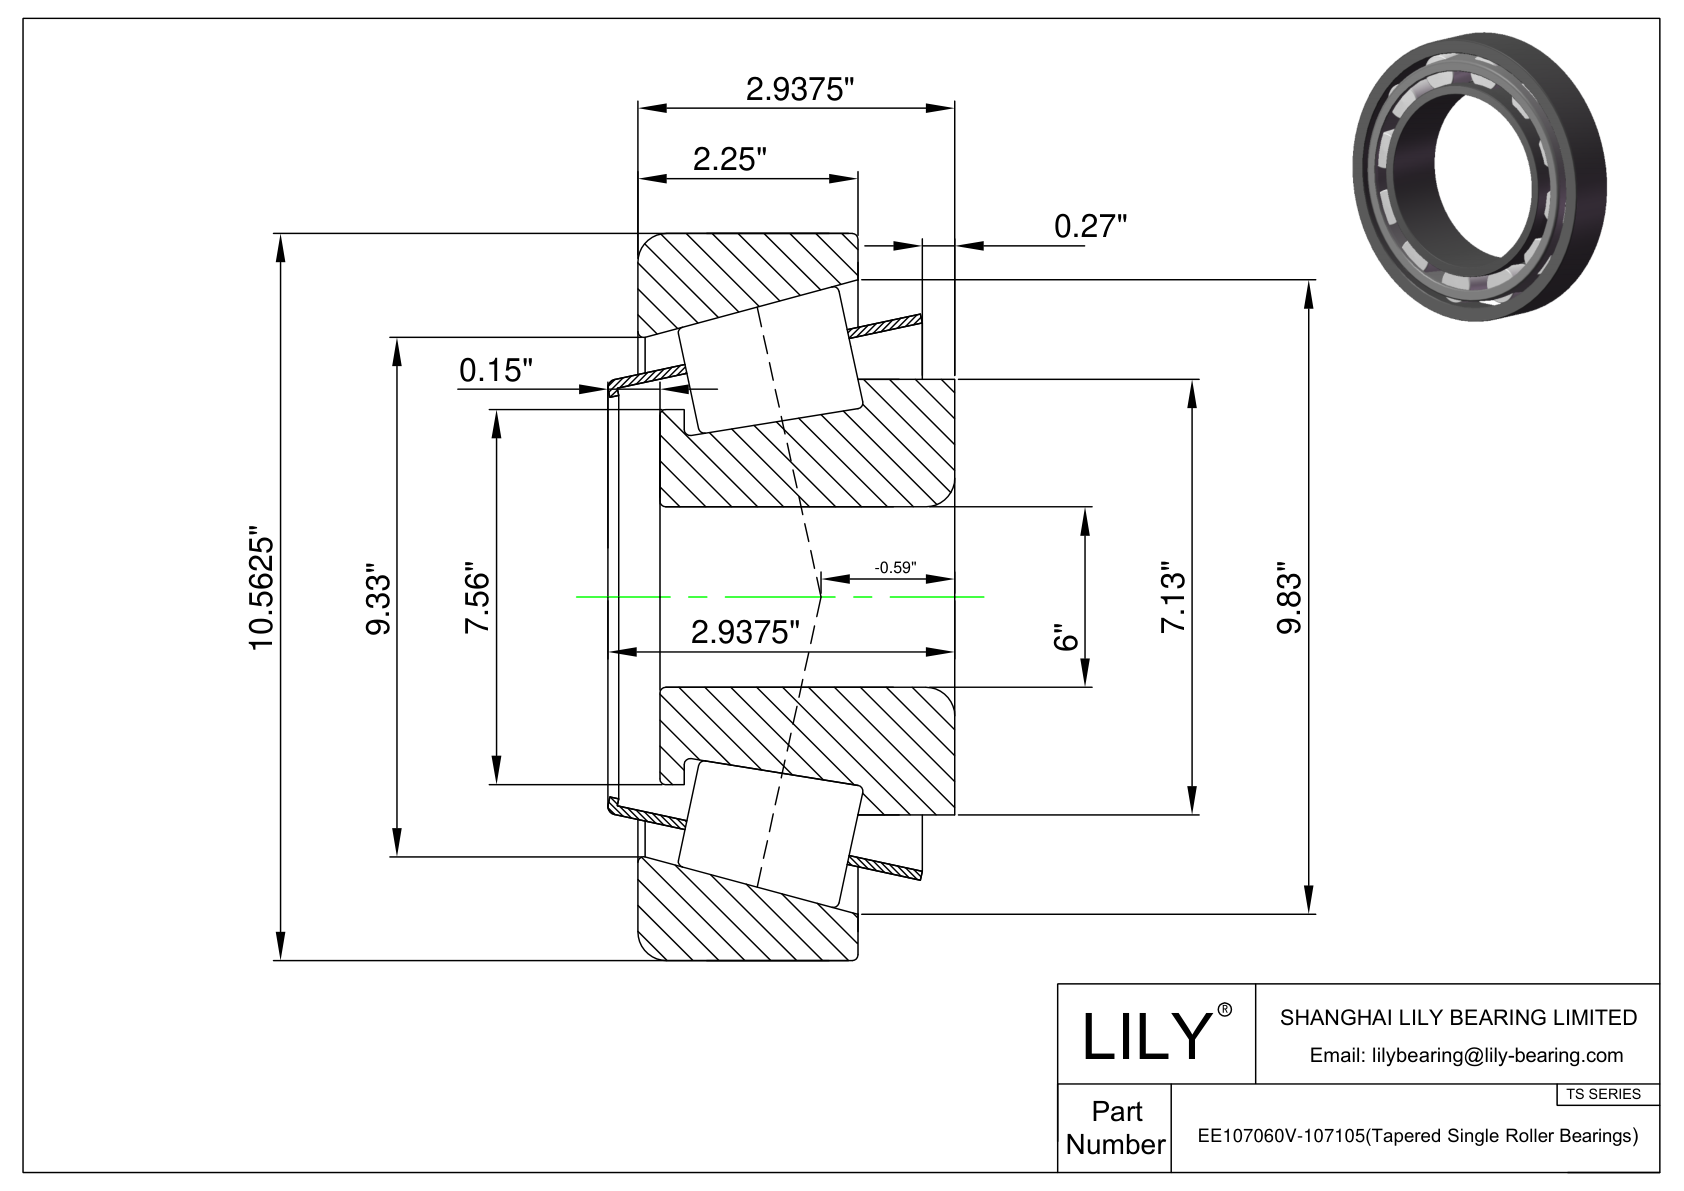 EE107060V-107105 TS (Tapered Single Roller Bearings) (Imperial) cad drawing